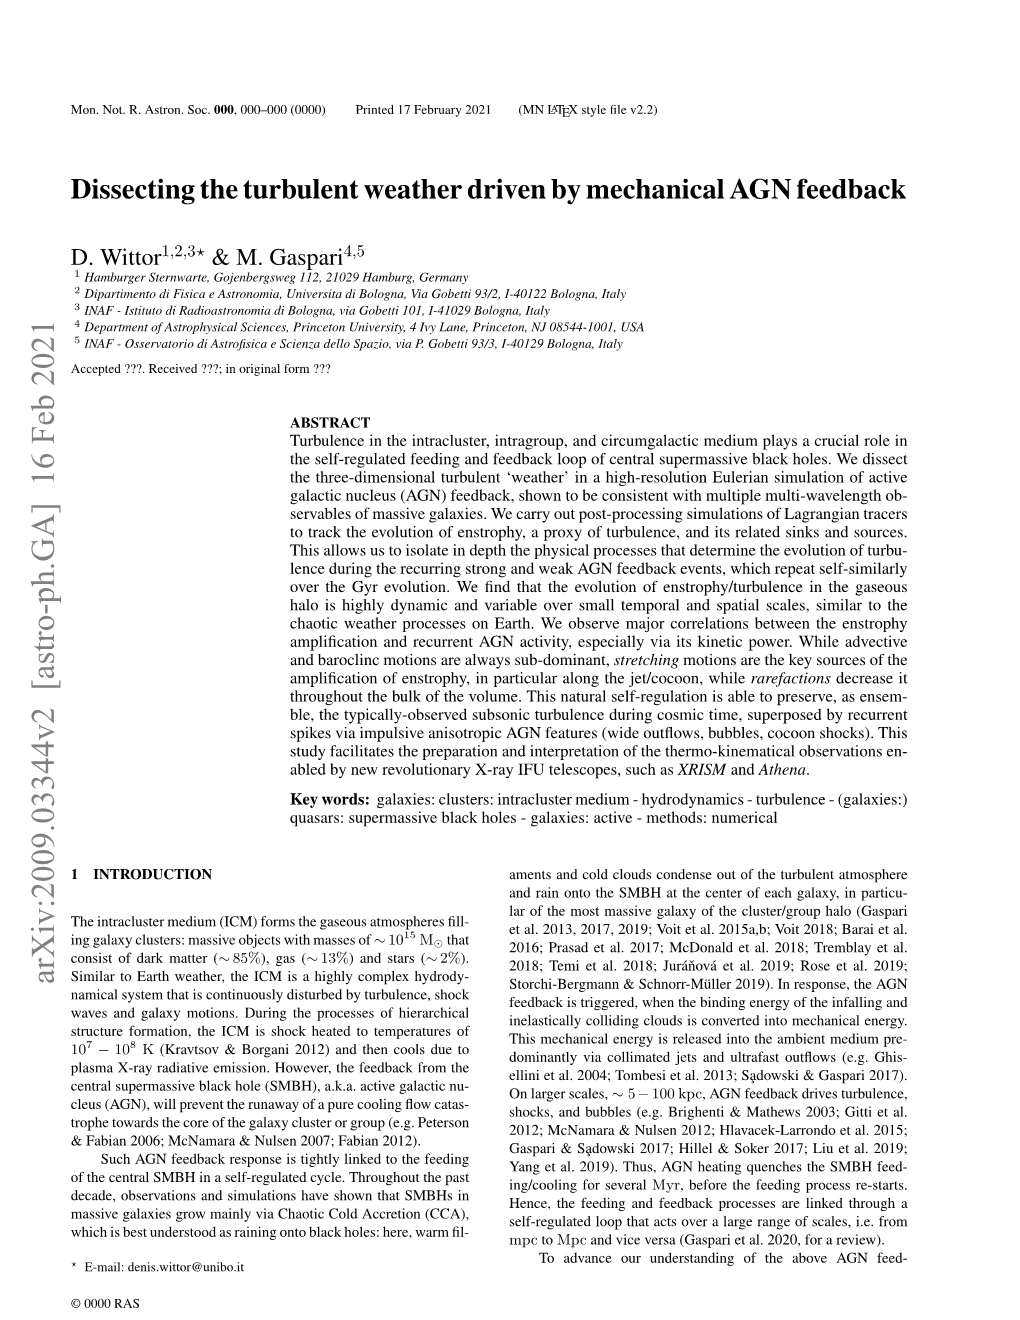 Dissecting the Turbulent Weather Driven by Mechanical AGN Feedback